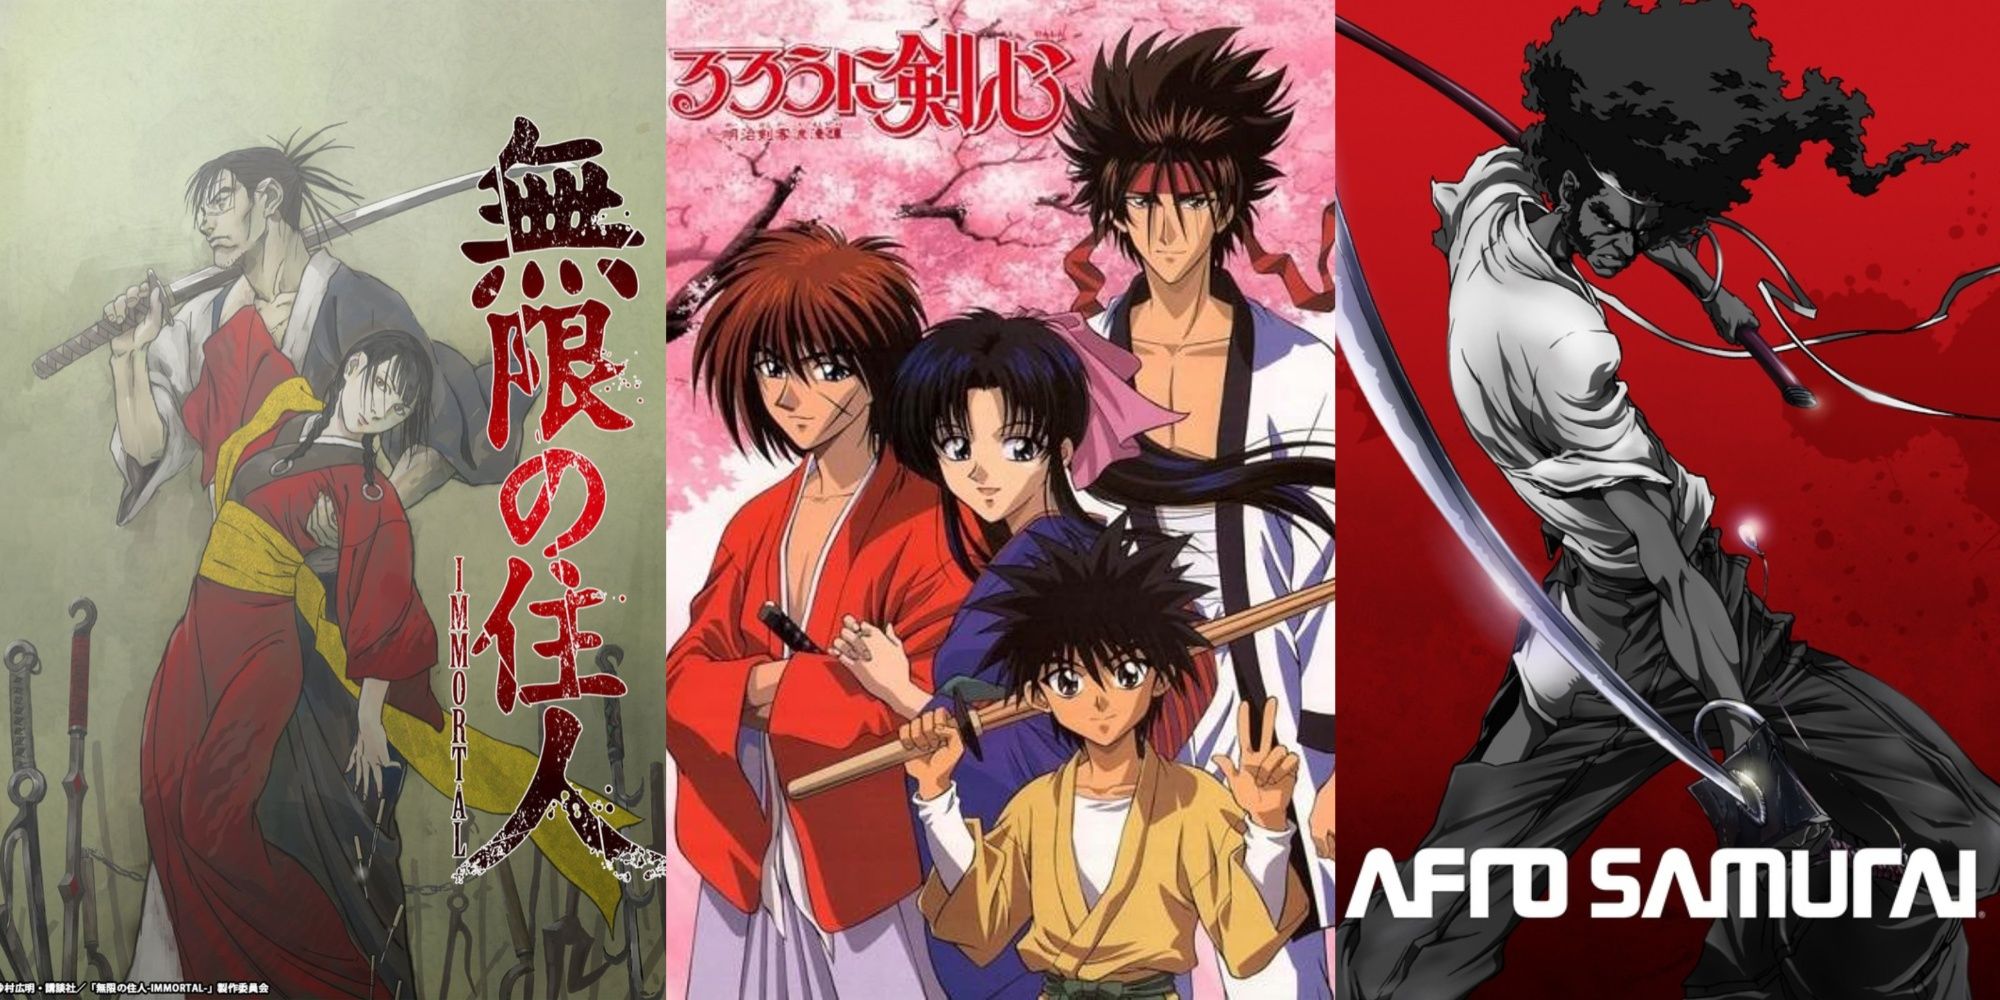 How closely does Rurouni Kenshin resemble real life? - Anime & Manga Stack  Exchange